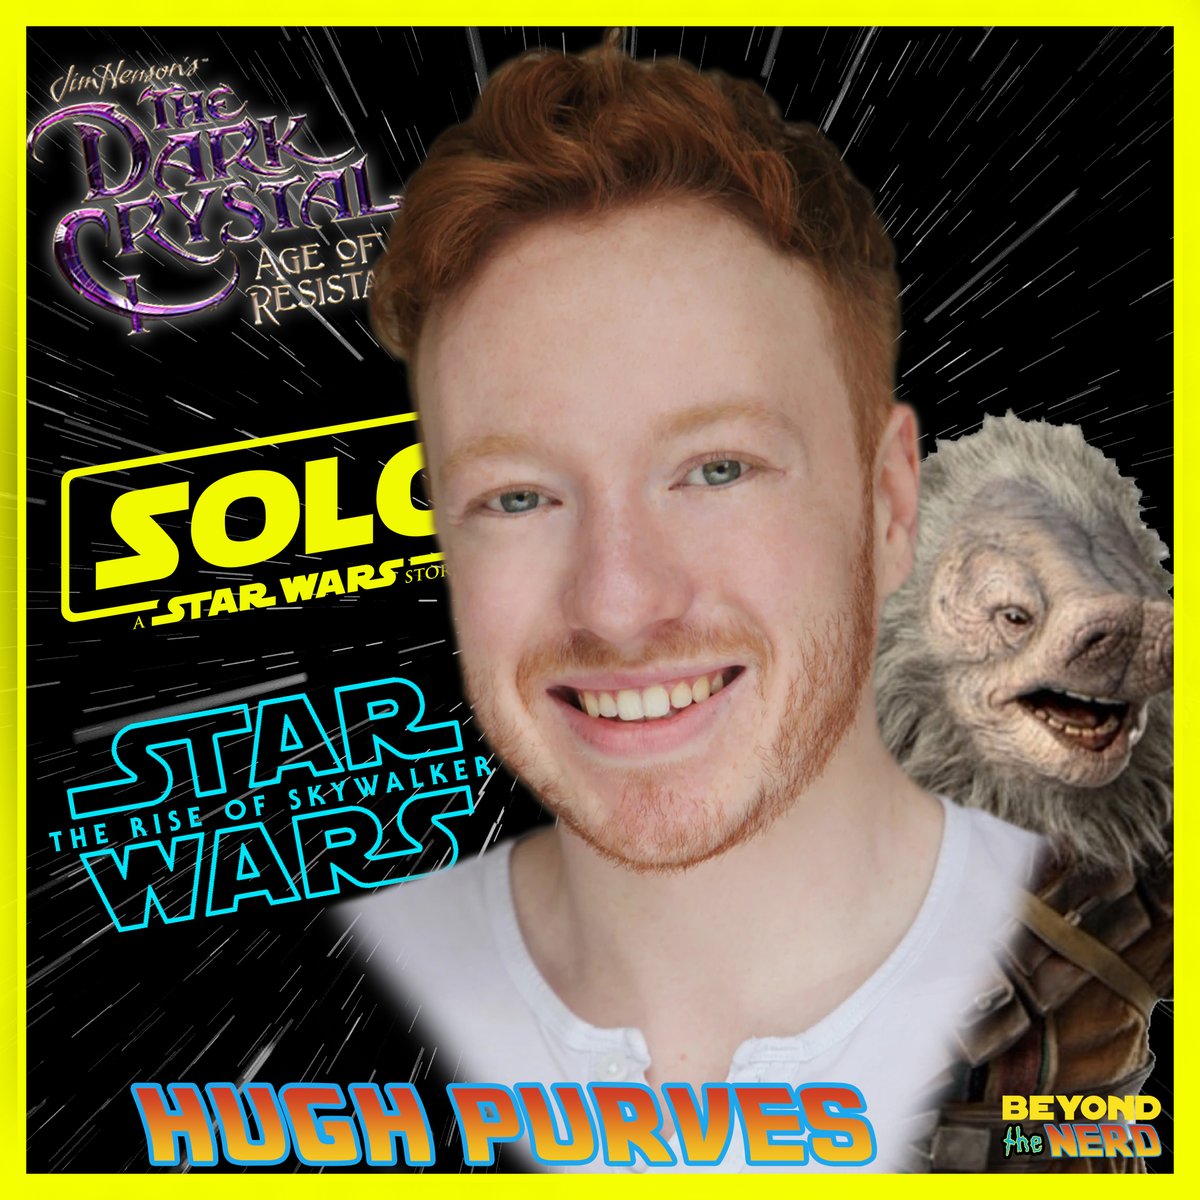 It's finally here! 

My new episode of Beyond the Nerd with 
@Hugh_Purves
  !!

*Listener warning there is some bad language*

open.spotify.com/show/2jgEh27pf…

#starwars #jedi #sith #darkcrystal #nerdypodcast #nerdpodcast #galaxyfarfaraway #maytheforcebewithyou